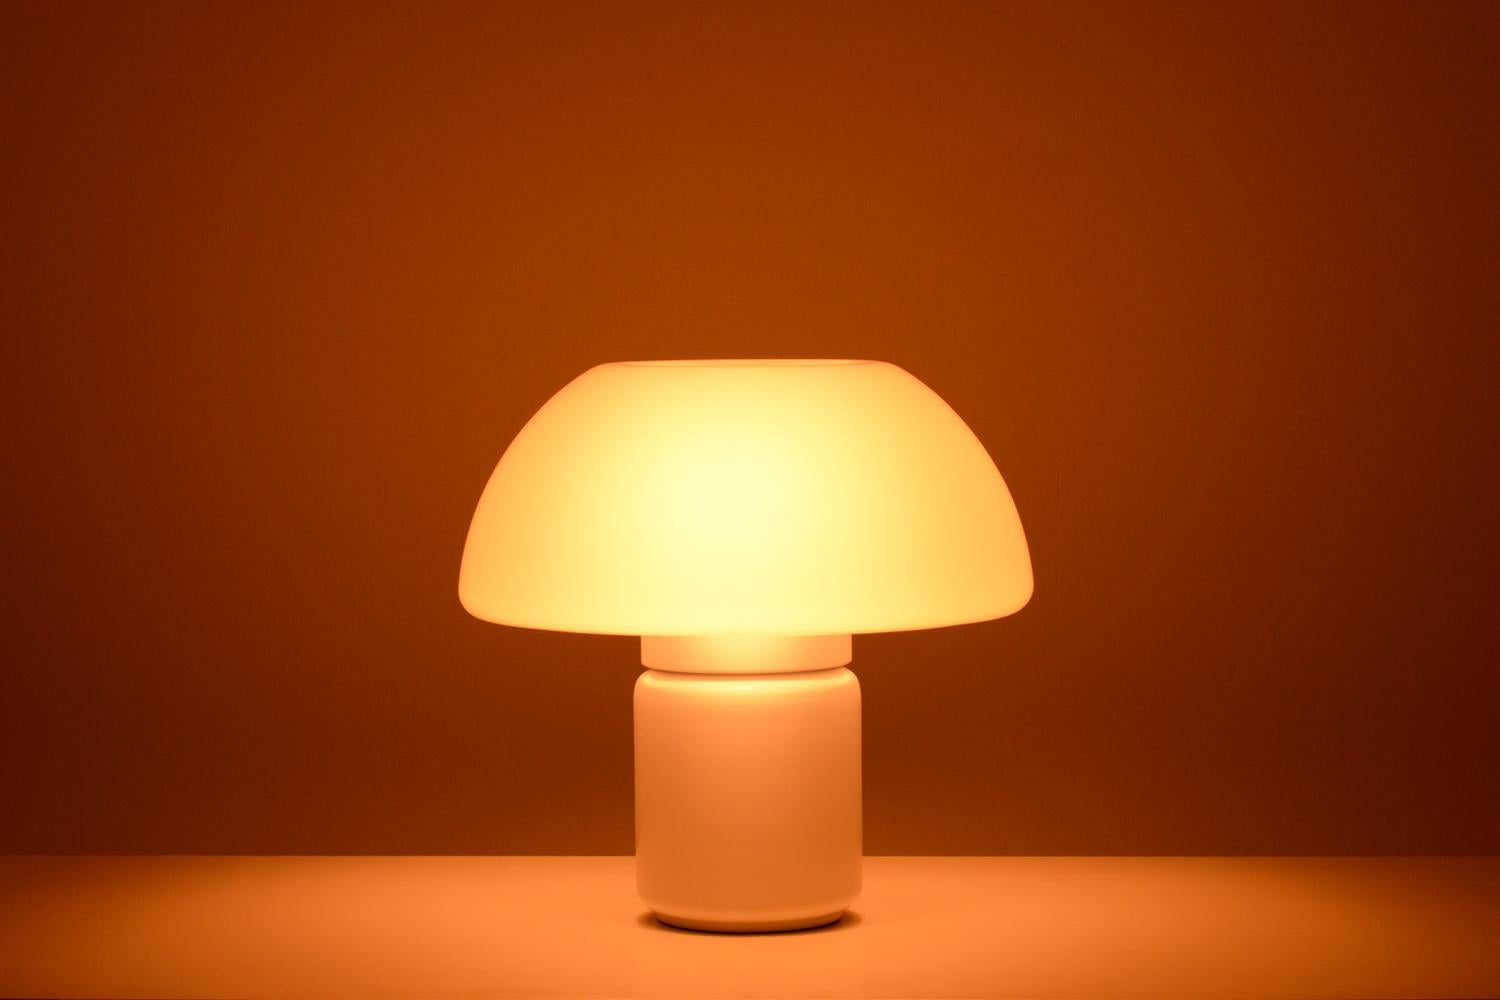 Mid-Century Modern “Mushroom” Table Lamp 625 by Elio Martilelli for Martinelli Luce, Italy 70s